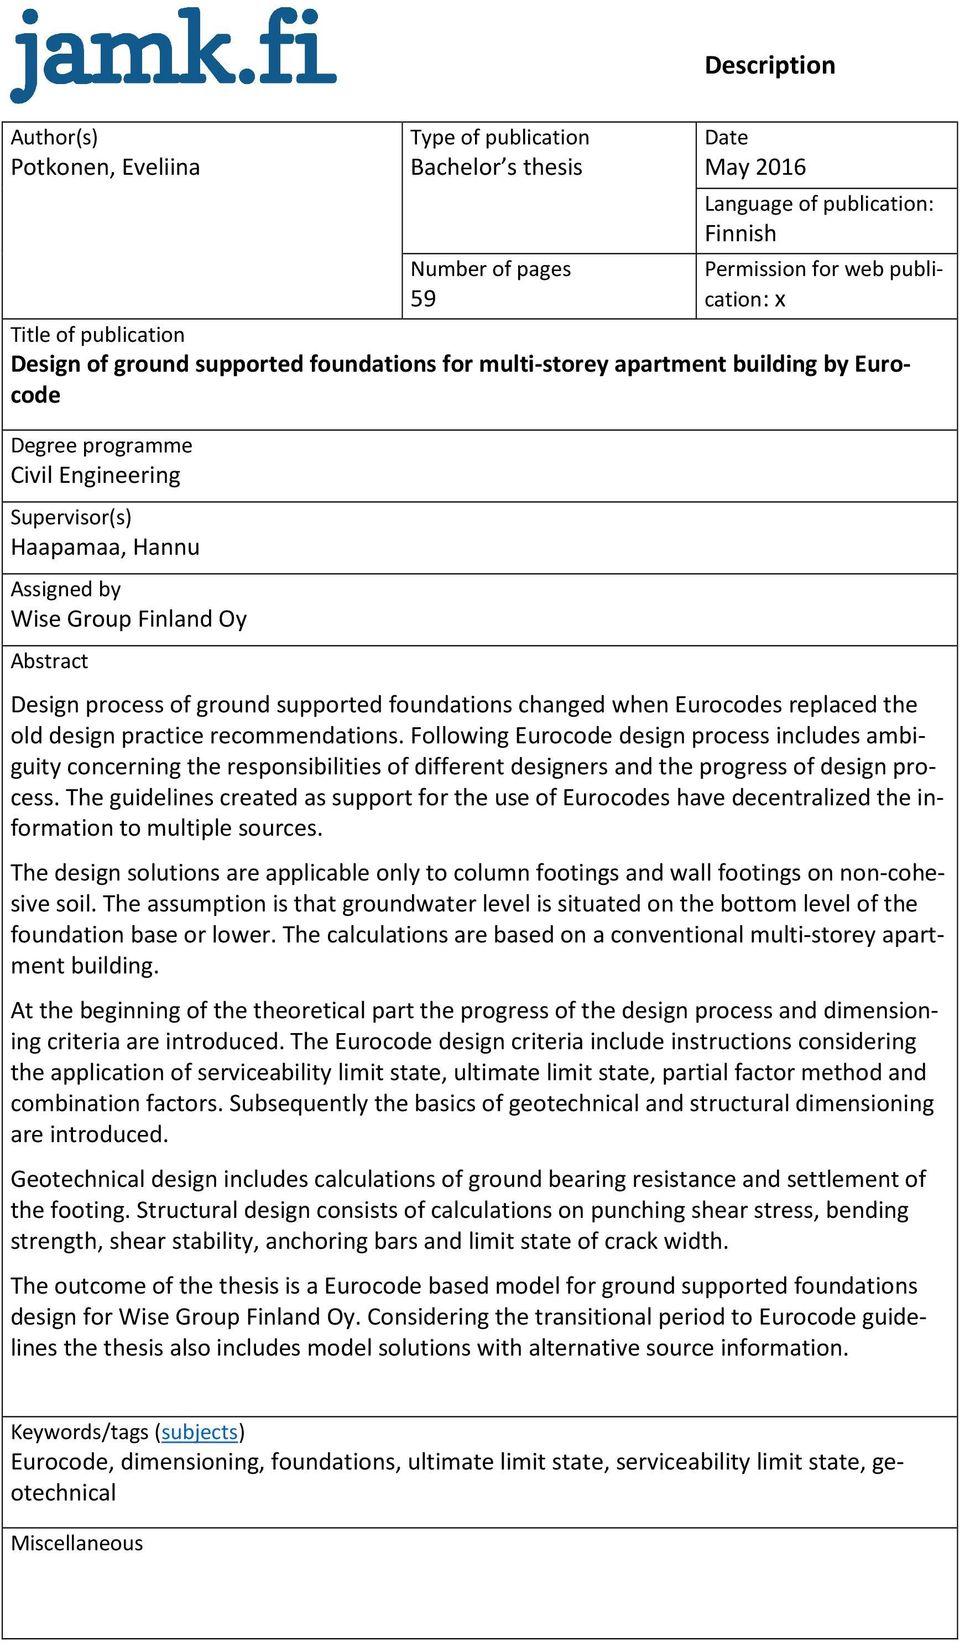 Design process of ground supported foundations changed when Eurocodes replaced the old design practice recommendations.